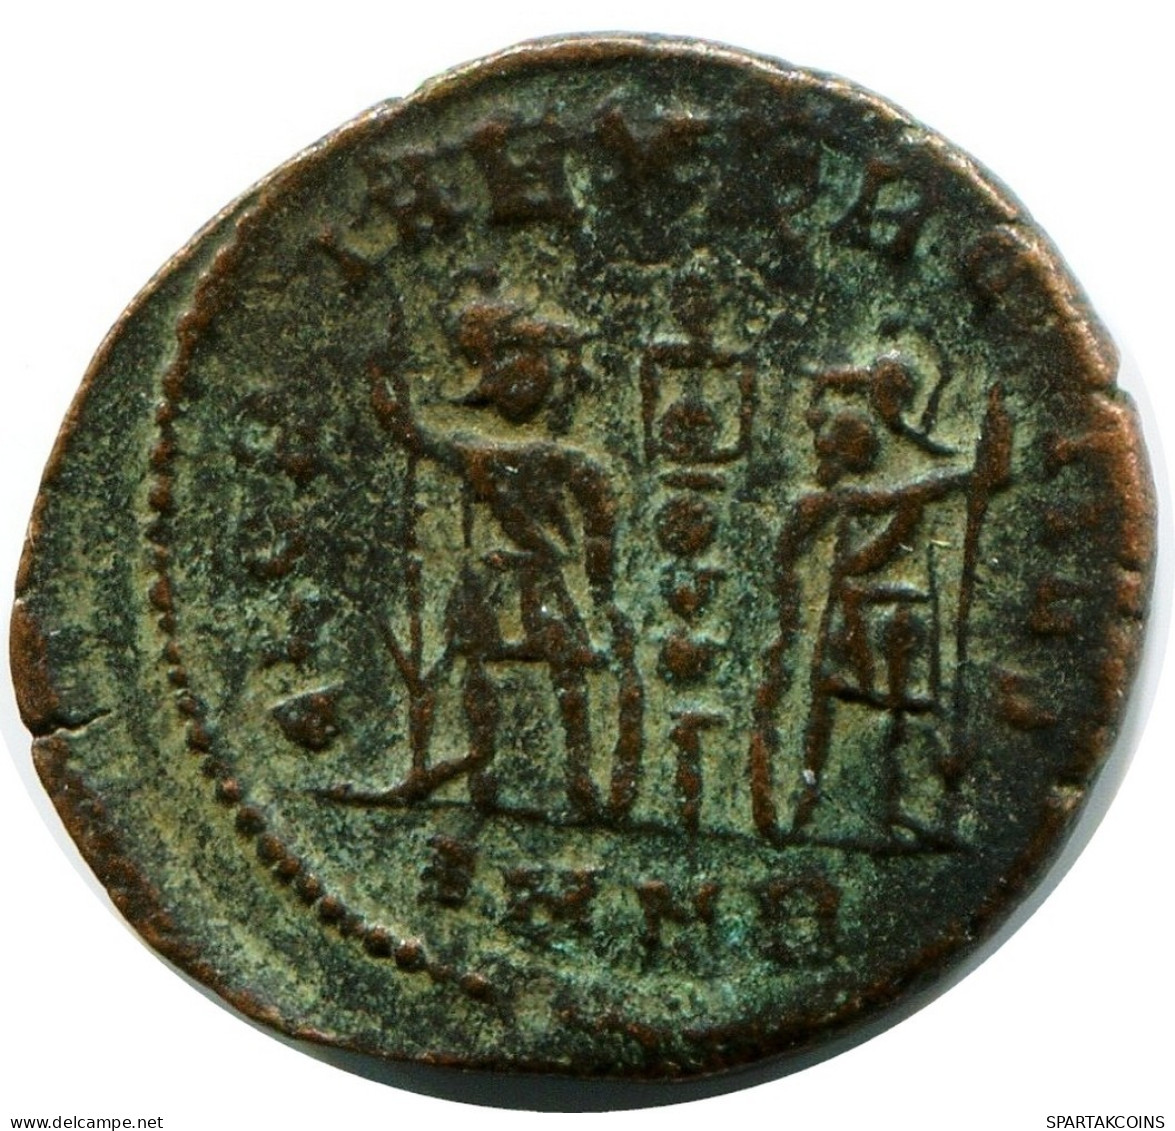 CONSTANS MINTED IN NICOMEDIA FROM THE ROYAL ONTARIO MUSEUM #ANC11721.14.E.A - L'Empire Chrétien (307 à 363)